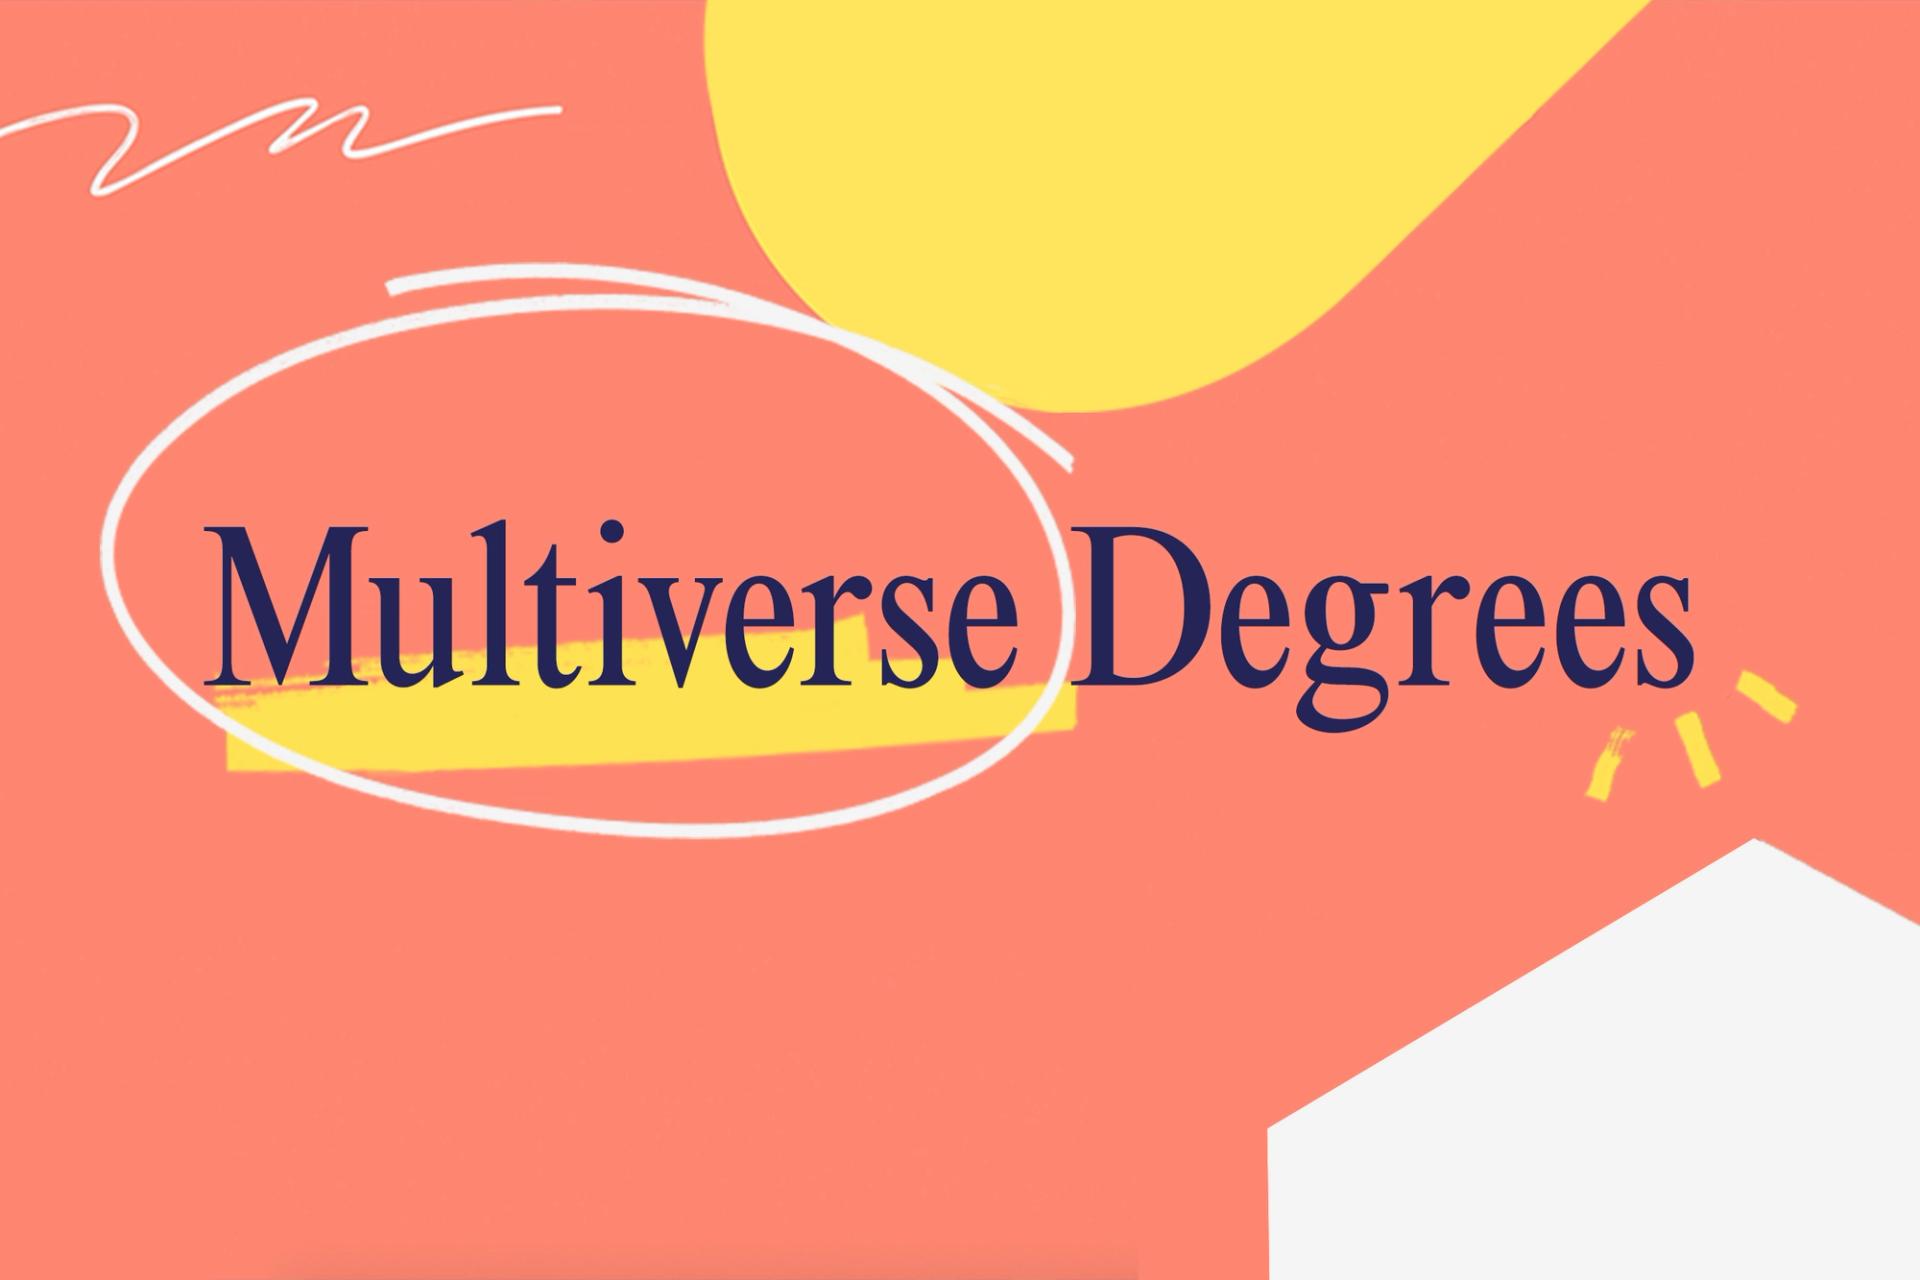 Text text: "Multiverse Degrees"